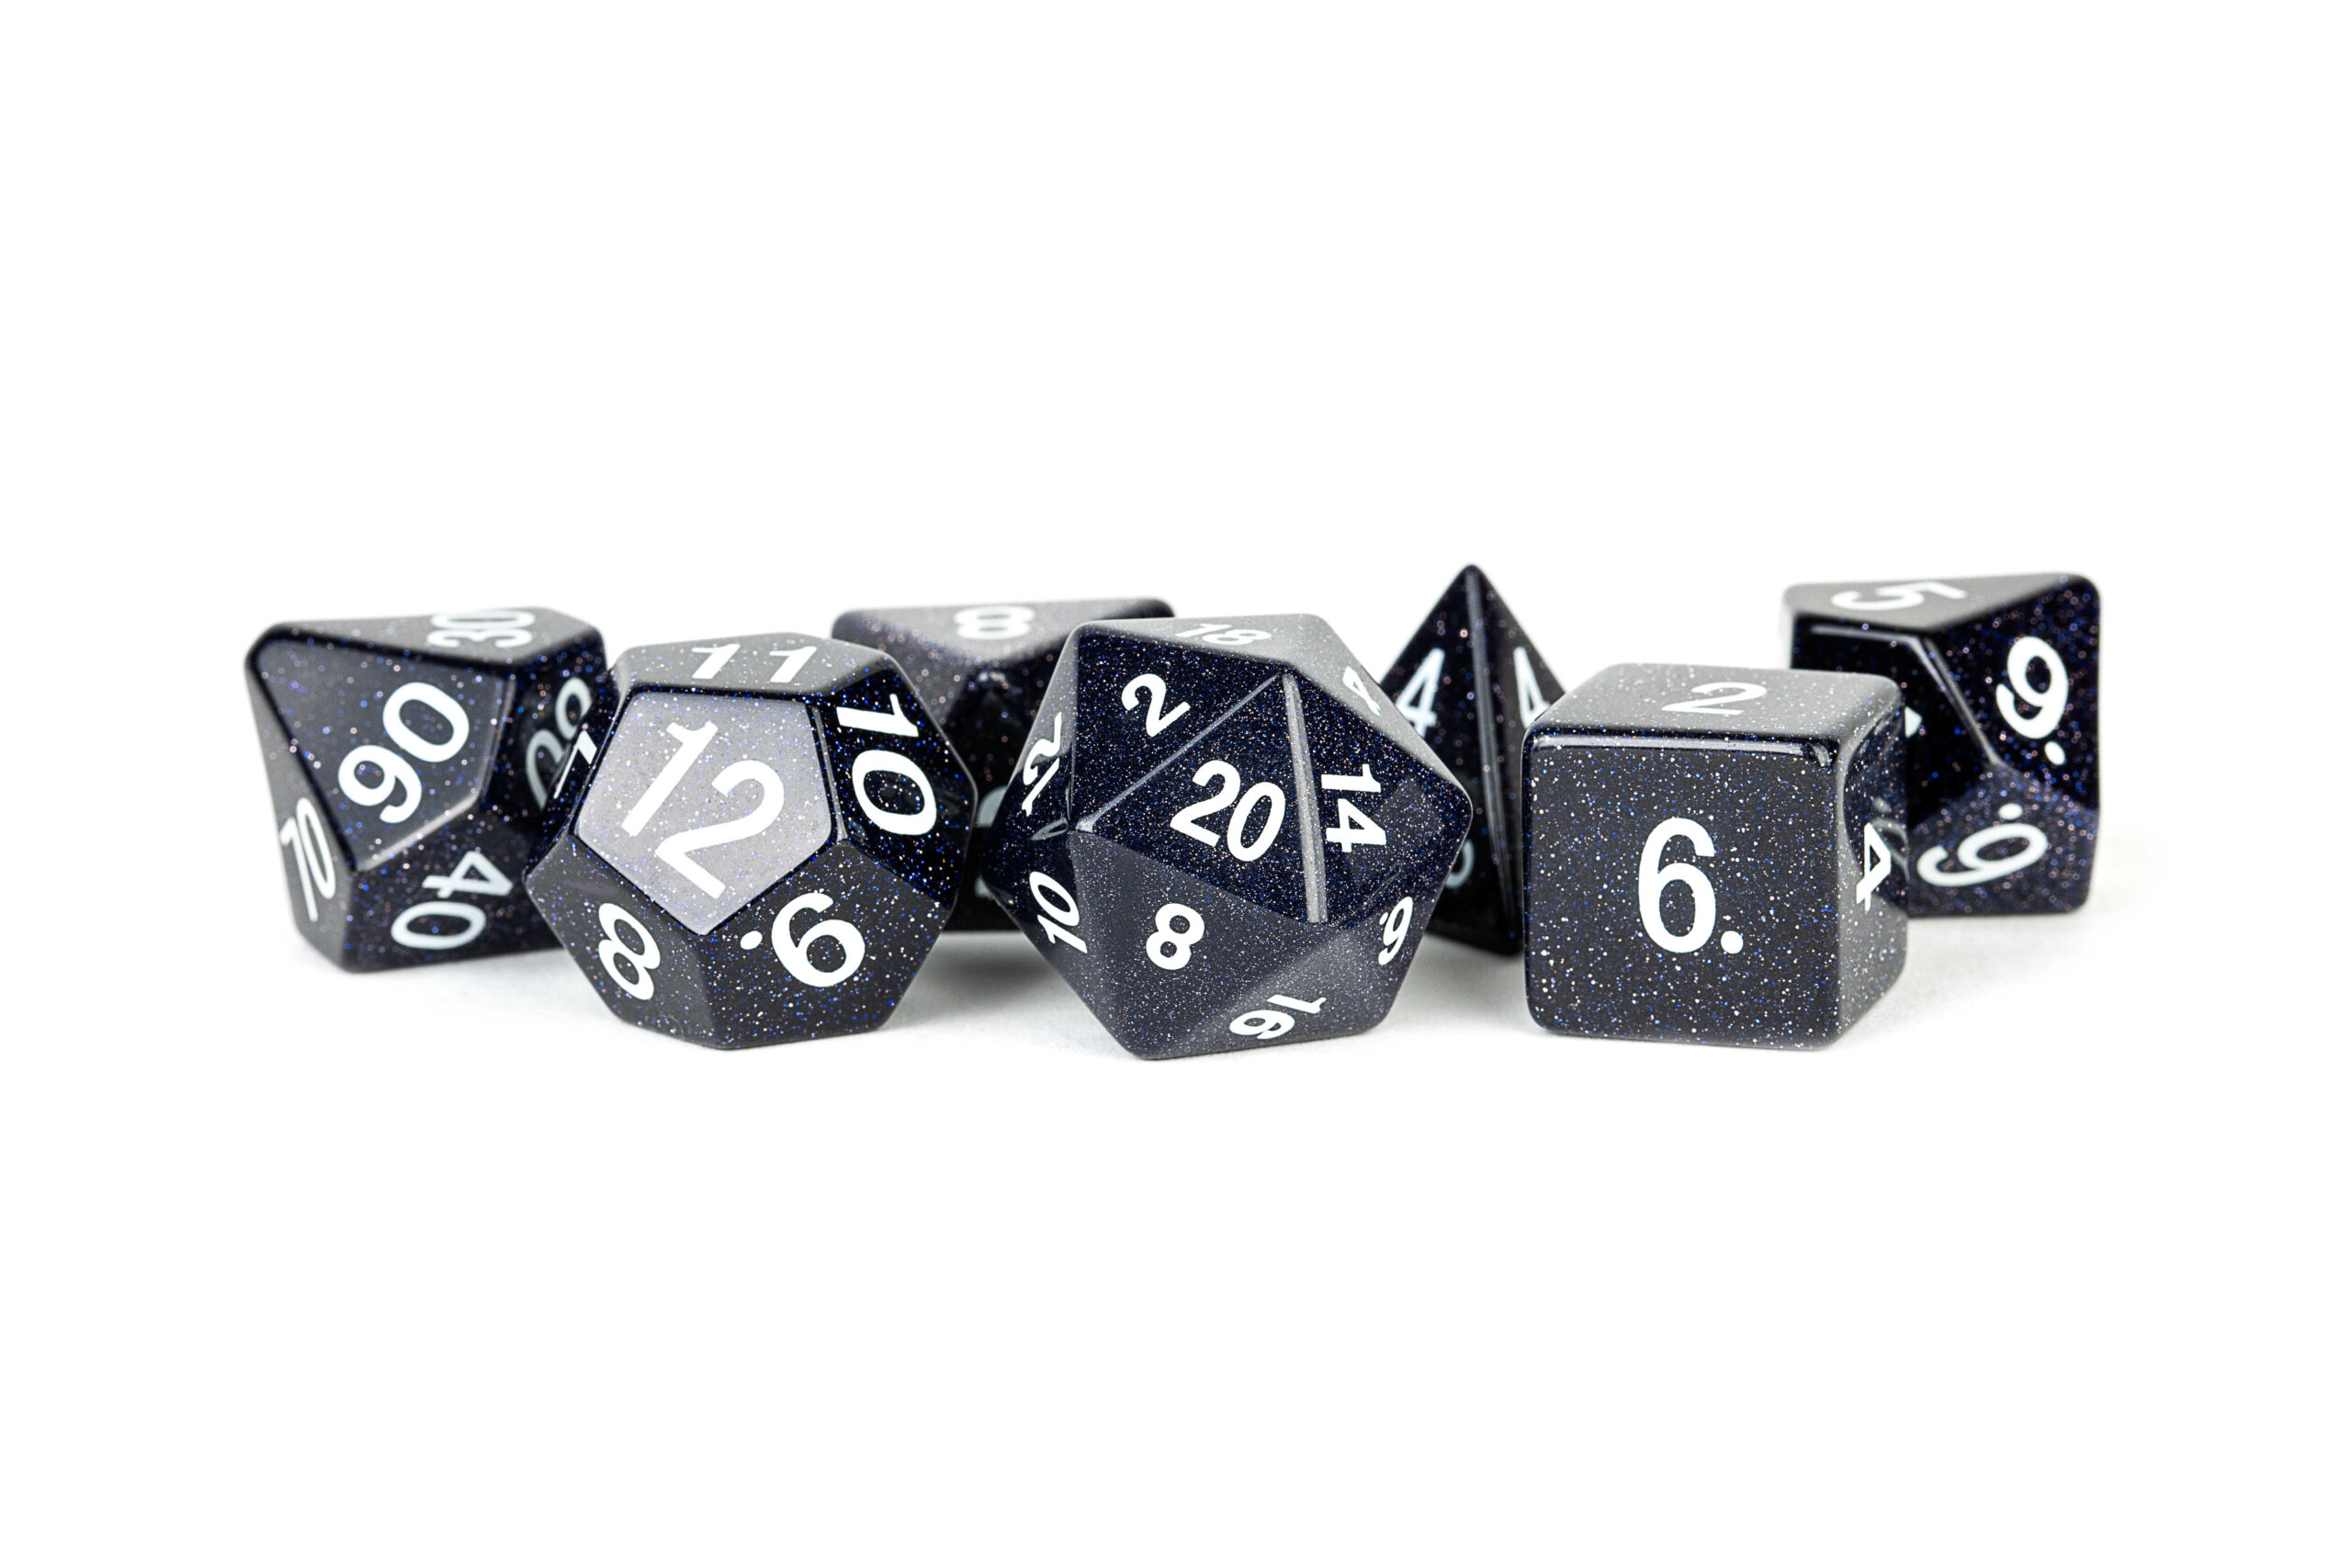 Blue Sandstone with white numbers Full-Sized 16mm Polyhedral Dice Set